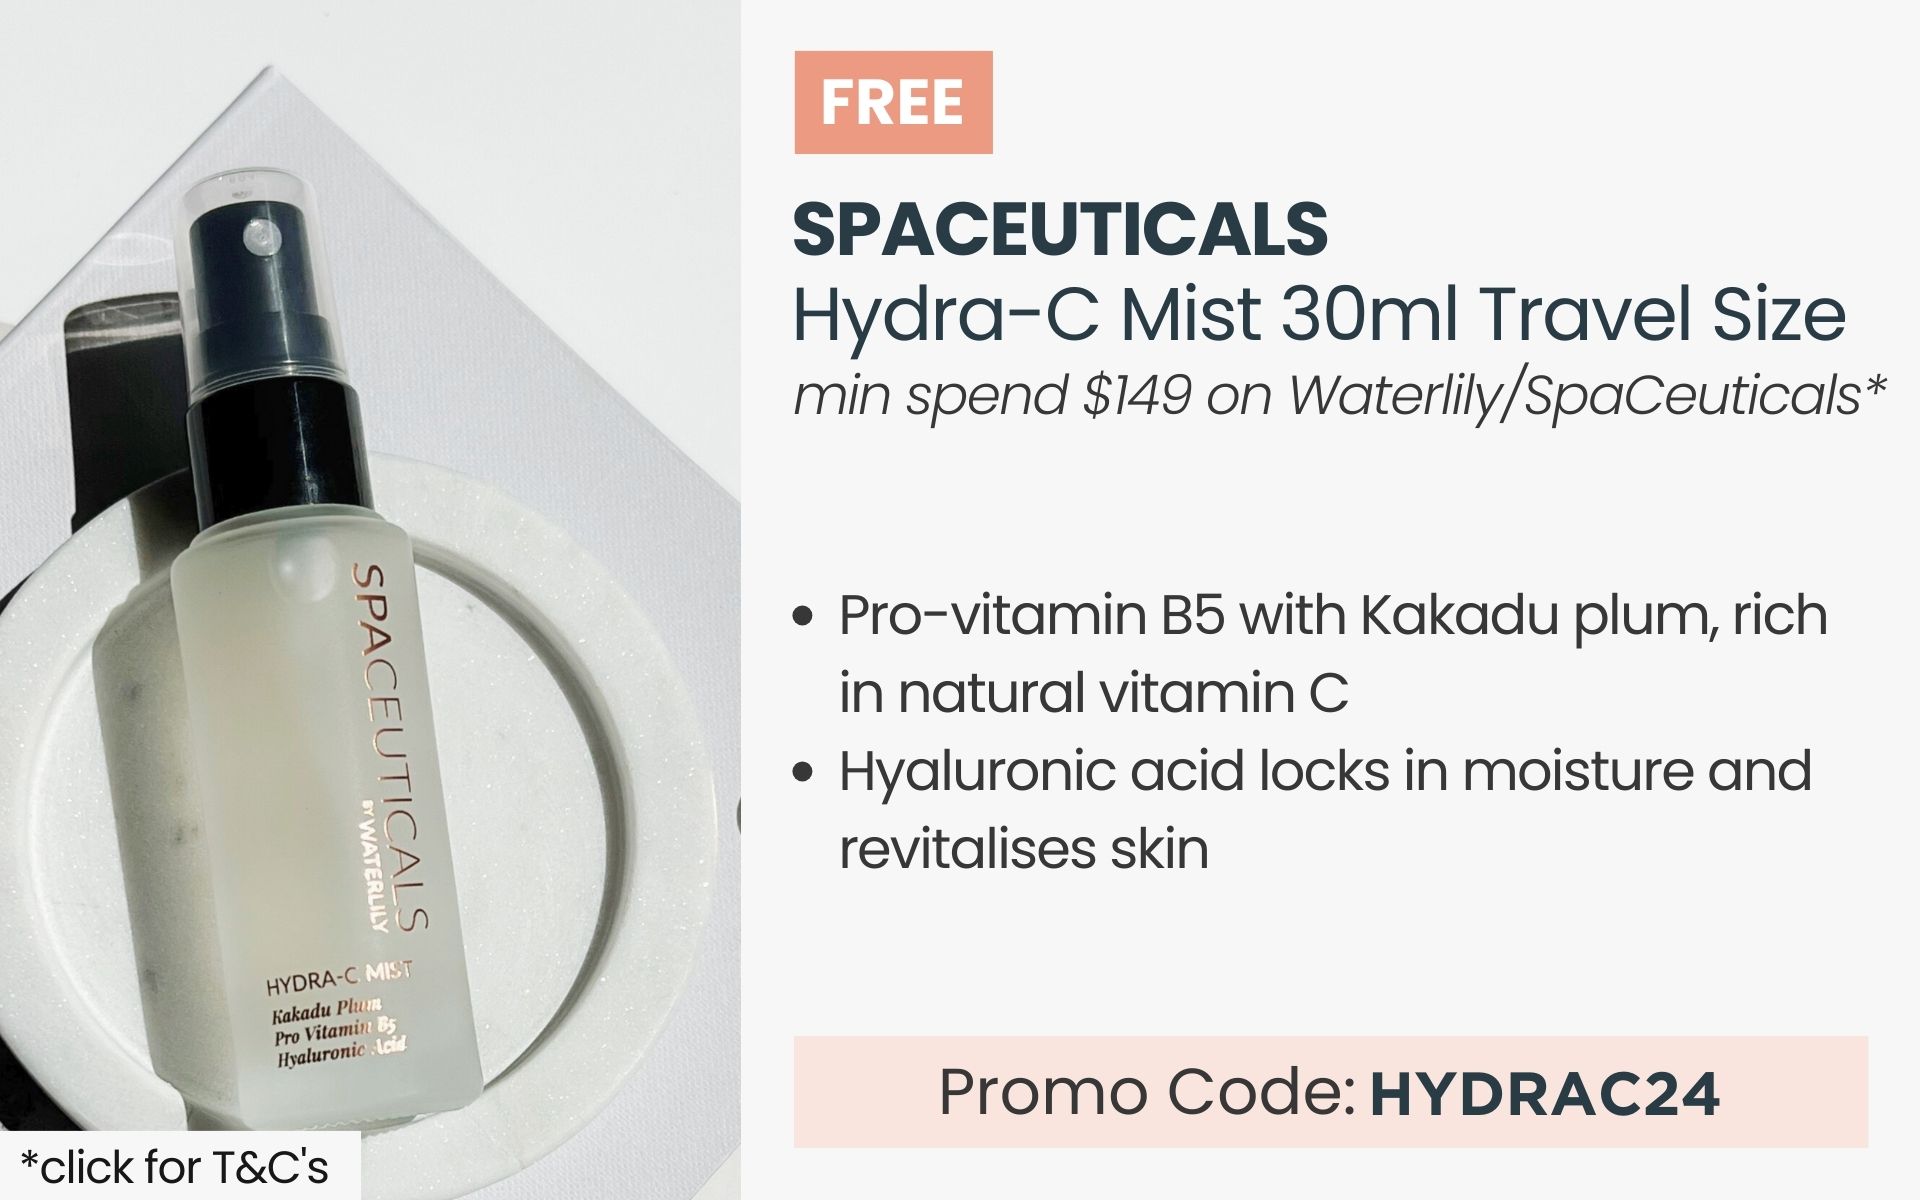 FREE SpaCeuticals Hydra-C Mist 30ml Travel Size. Min spend $149 on Waterlily or SpaCeuticals. Promo Code HYDRAC24